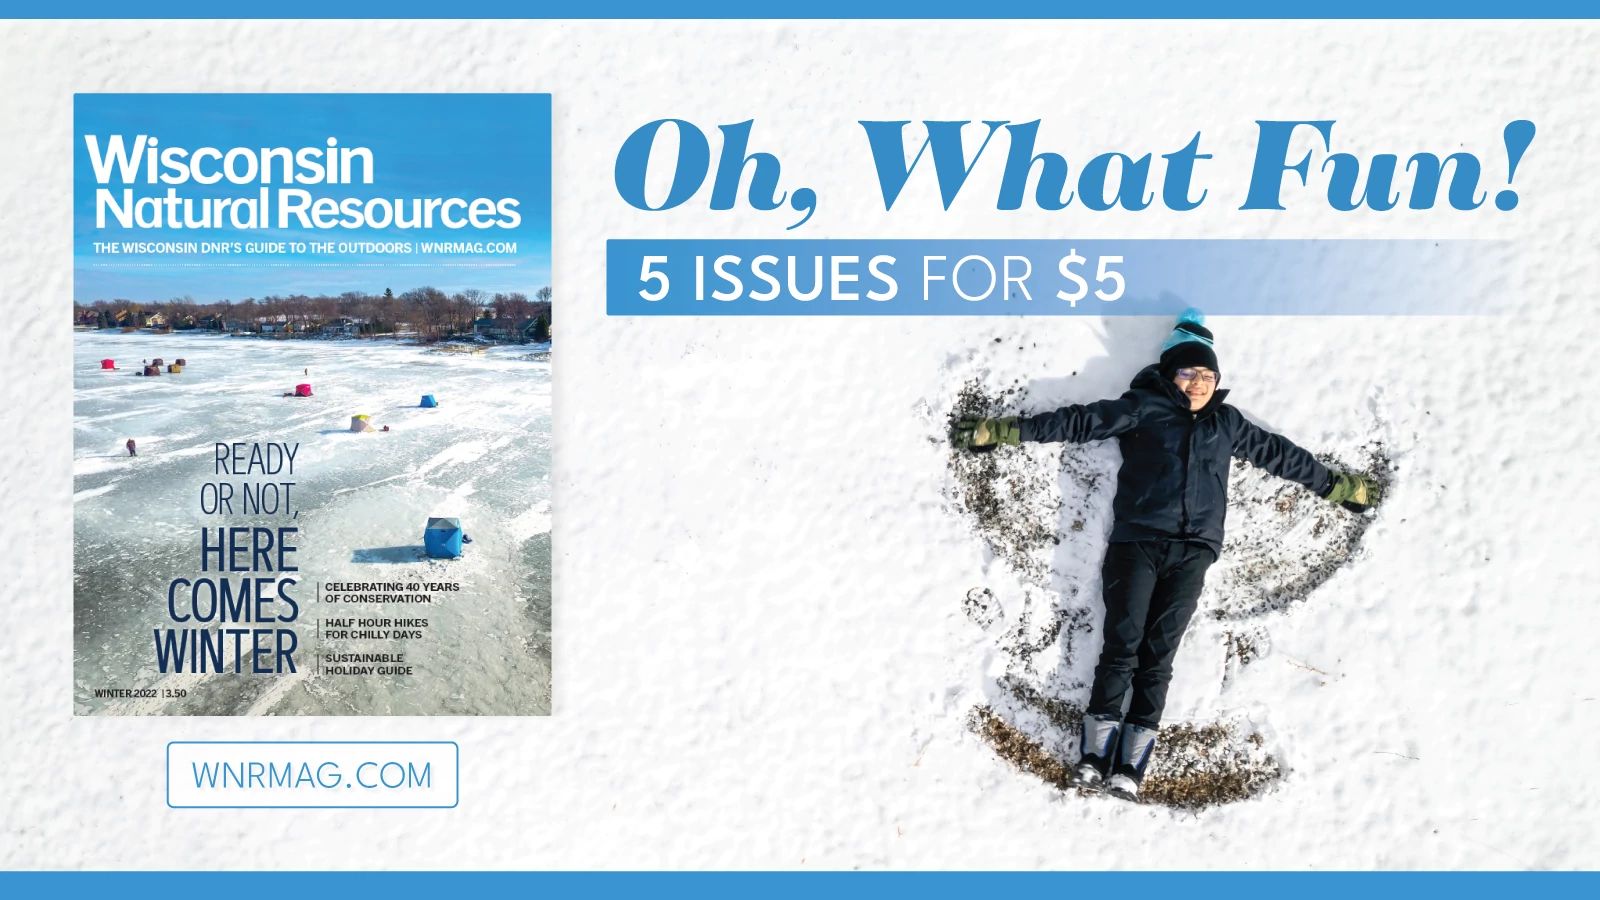 A promotional image for the Wisconsin Natural Resources magazine holiday promotion. Text on the graphic says Oh, What Fun 5 issues for $5. WNRMag.com. It also includes a boy making a snow angel.